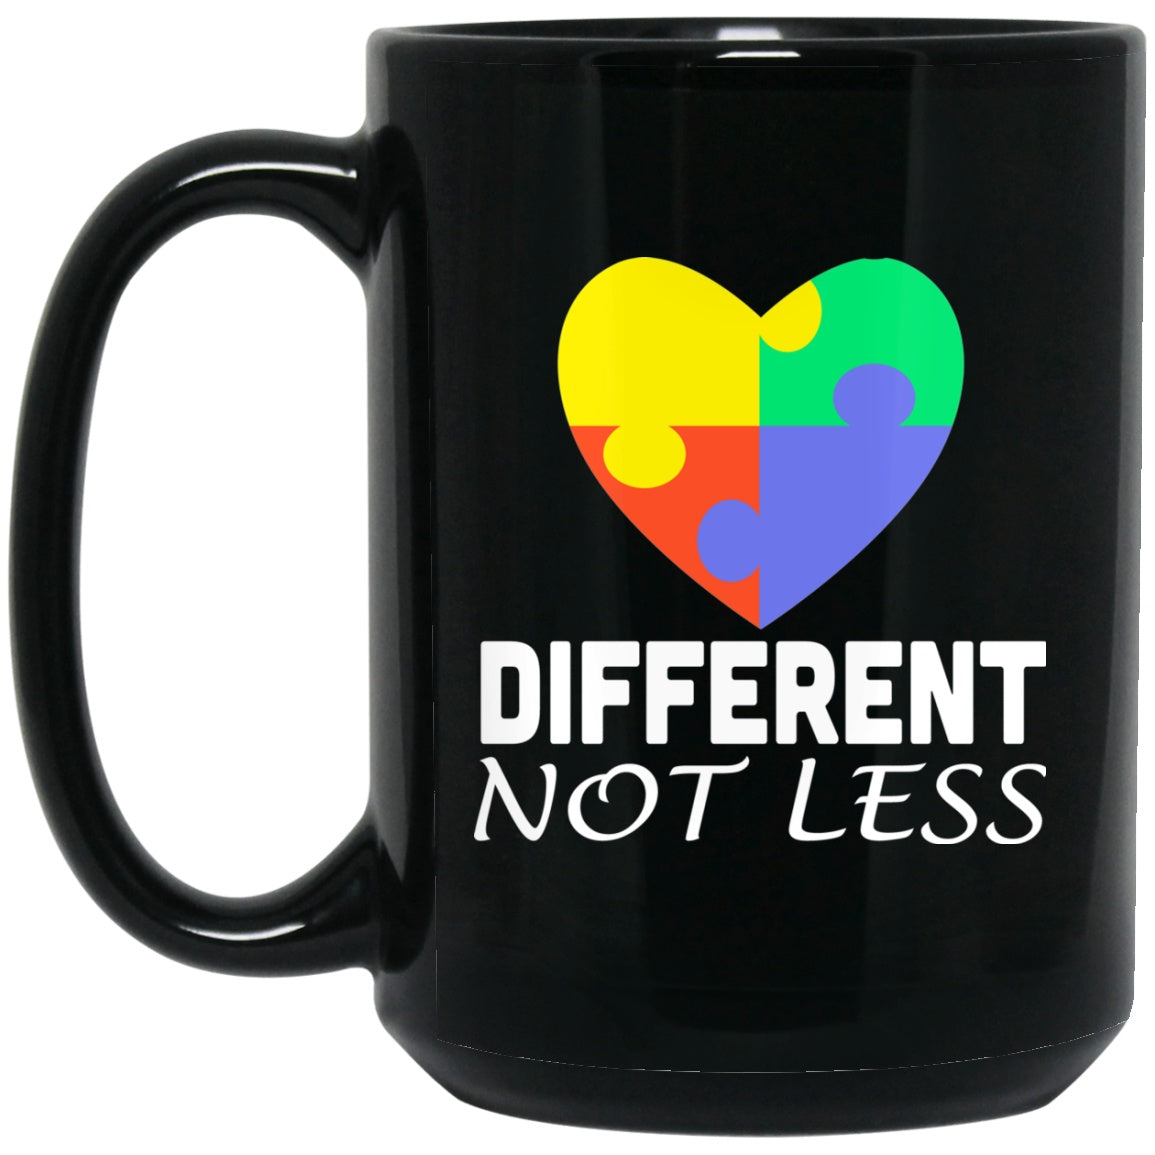 Autism Awareness Mug Different Not Less Heart jigsaw puzzle pieces Black Coffee Mugs - GoneBold.gift